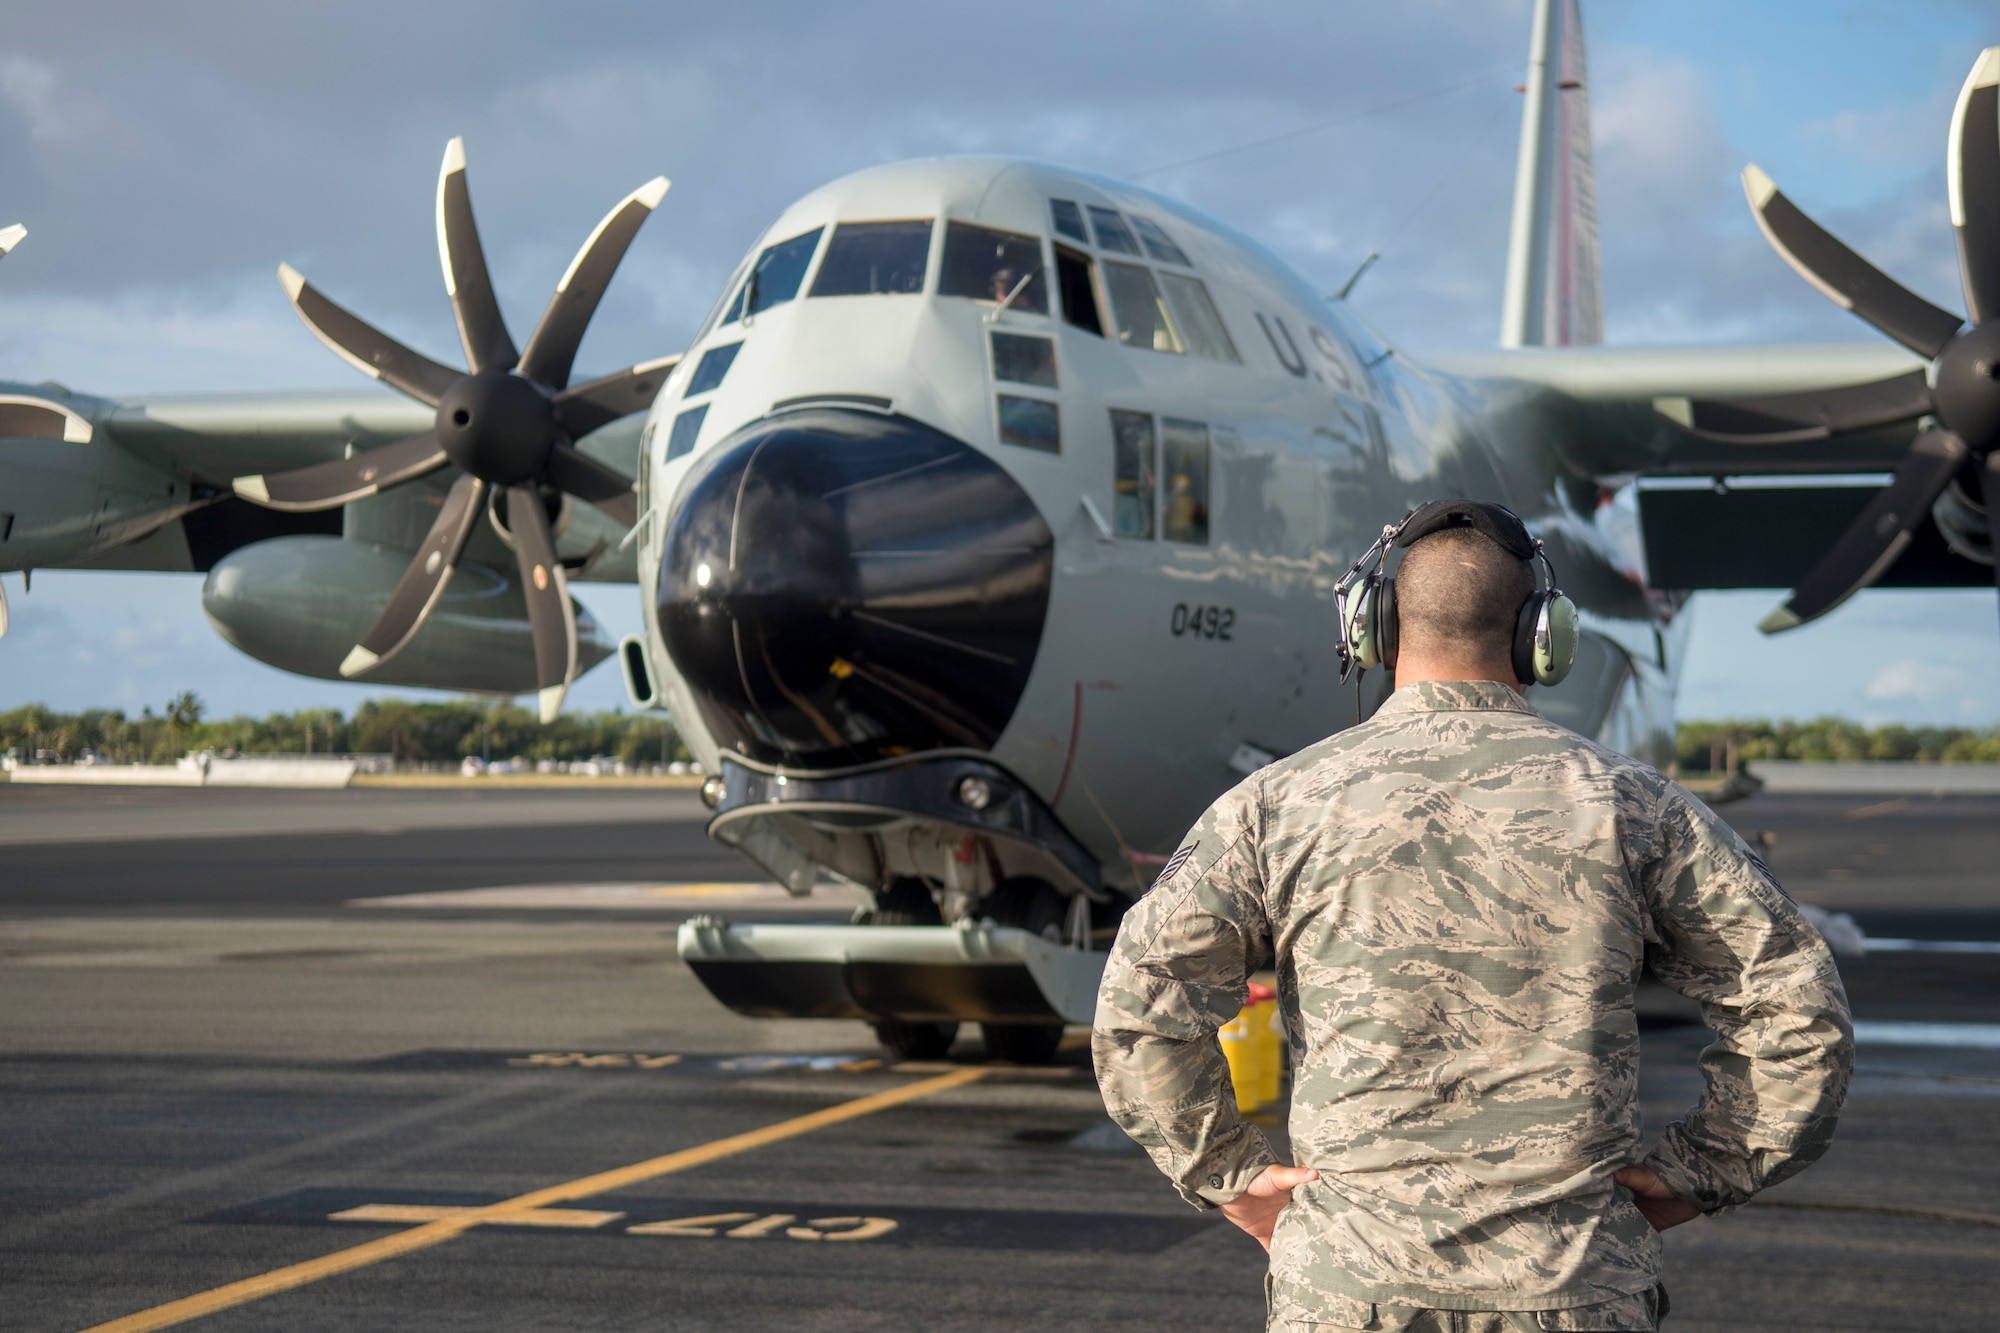 An Airman assigned to the 109th Airlift Wing, Stratton Air National Guard Base, New York, performs pre-flight inspections on an LC-130 Hercules on the flightline at Joint Base Pearl Harbor-Hickam, Hawaii, March 7, 2020. The crew was supporting Operation DEEP FREEZE.  U.S. Indo-Pacific Command assumed logistical support for the U.S. Antarctic Program from U.S. Transportation Command on March 1, 2005. (U.S. Air Force photo by Staff Sgt. Mikaley Kline)